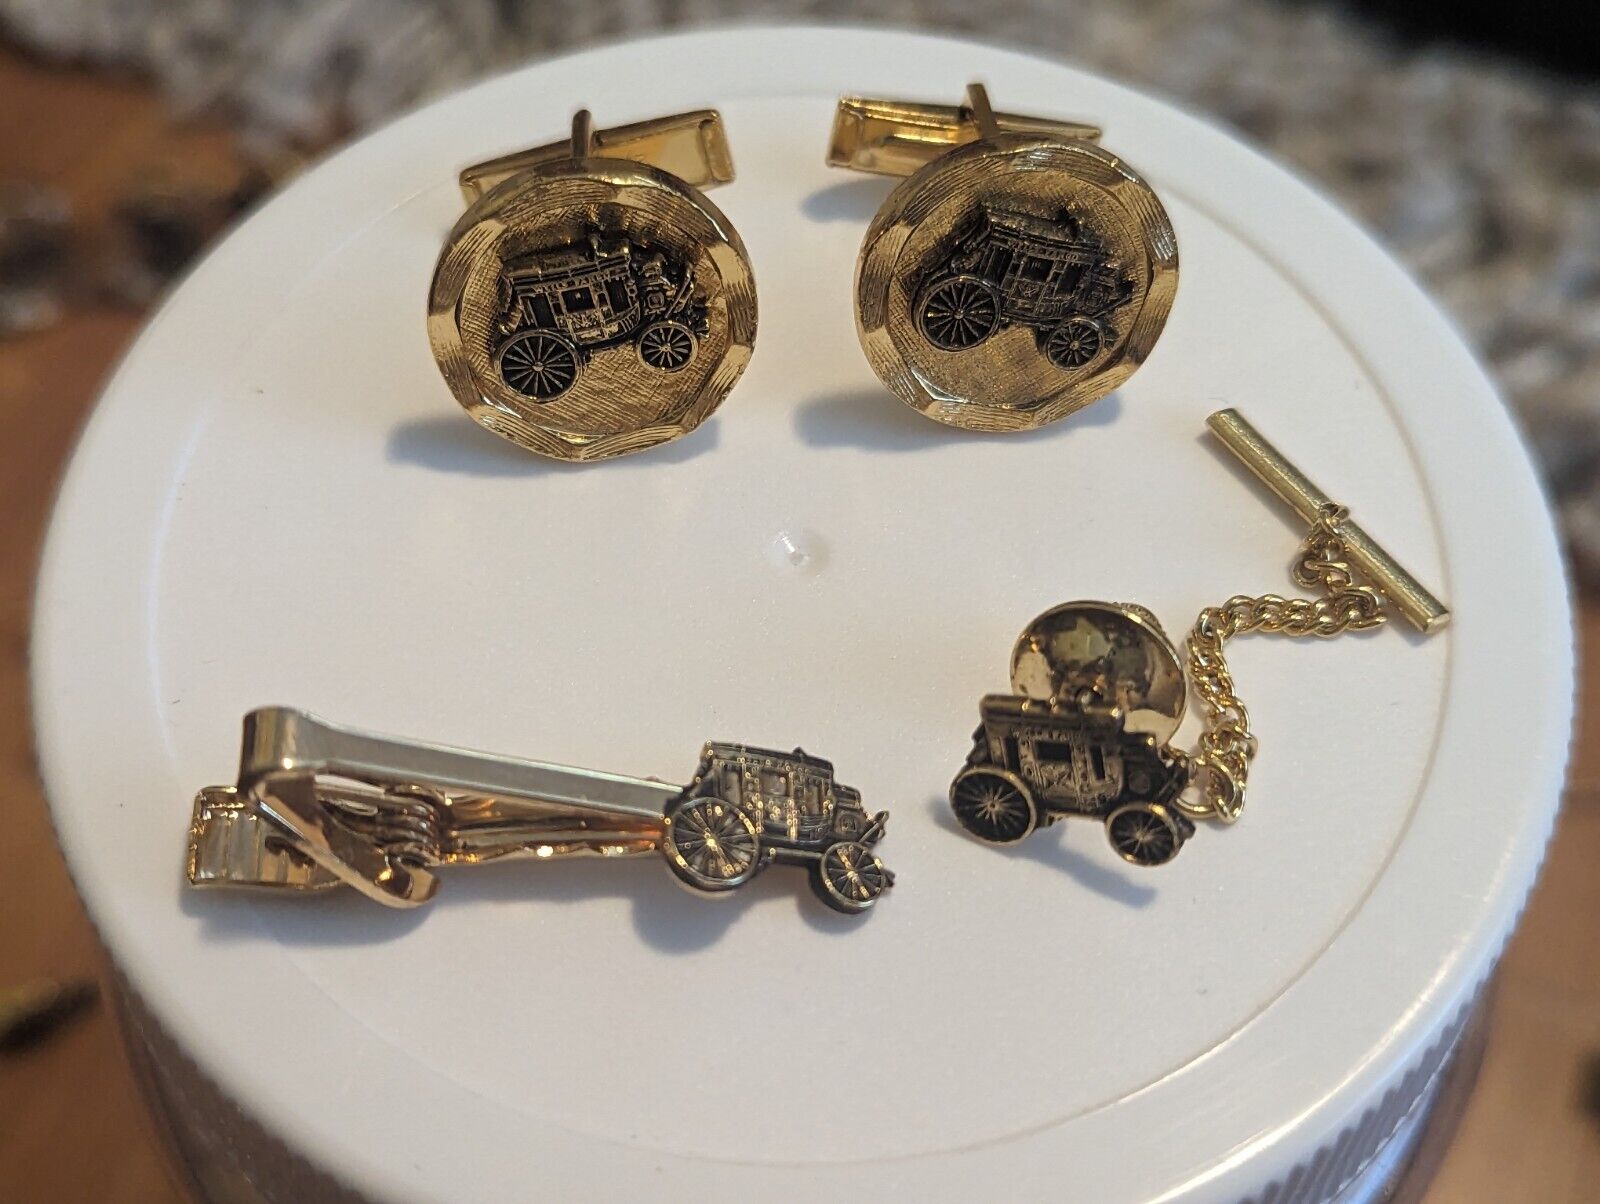 VTG Wells Fargo & Co Stage Coach Pewter Cufflinks Tie Clip Tie Tack Pin Lot Of 3